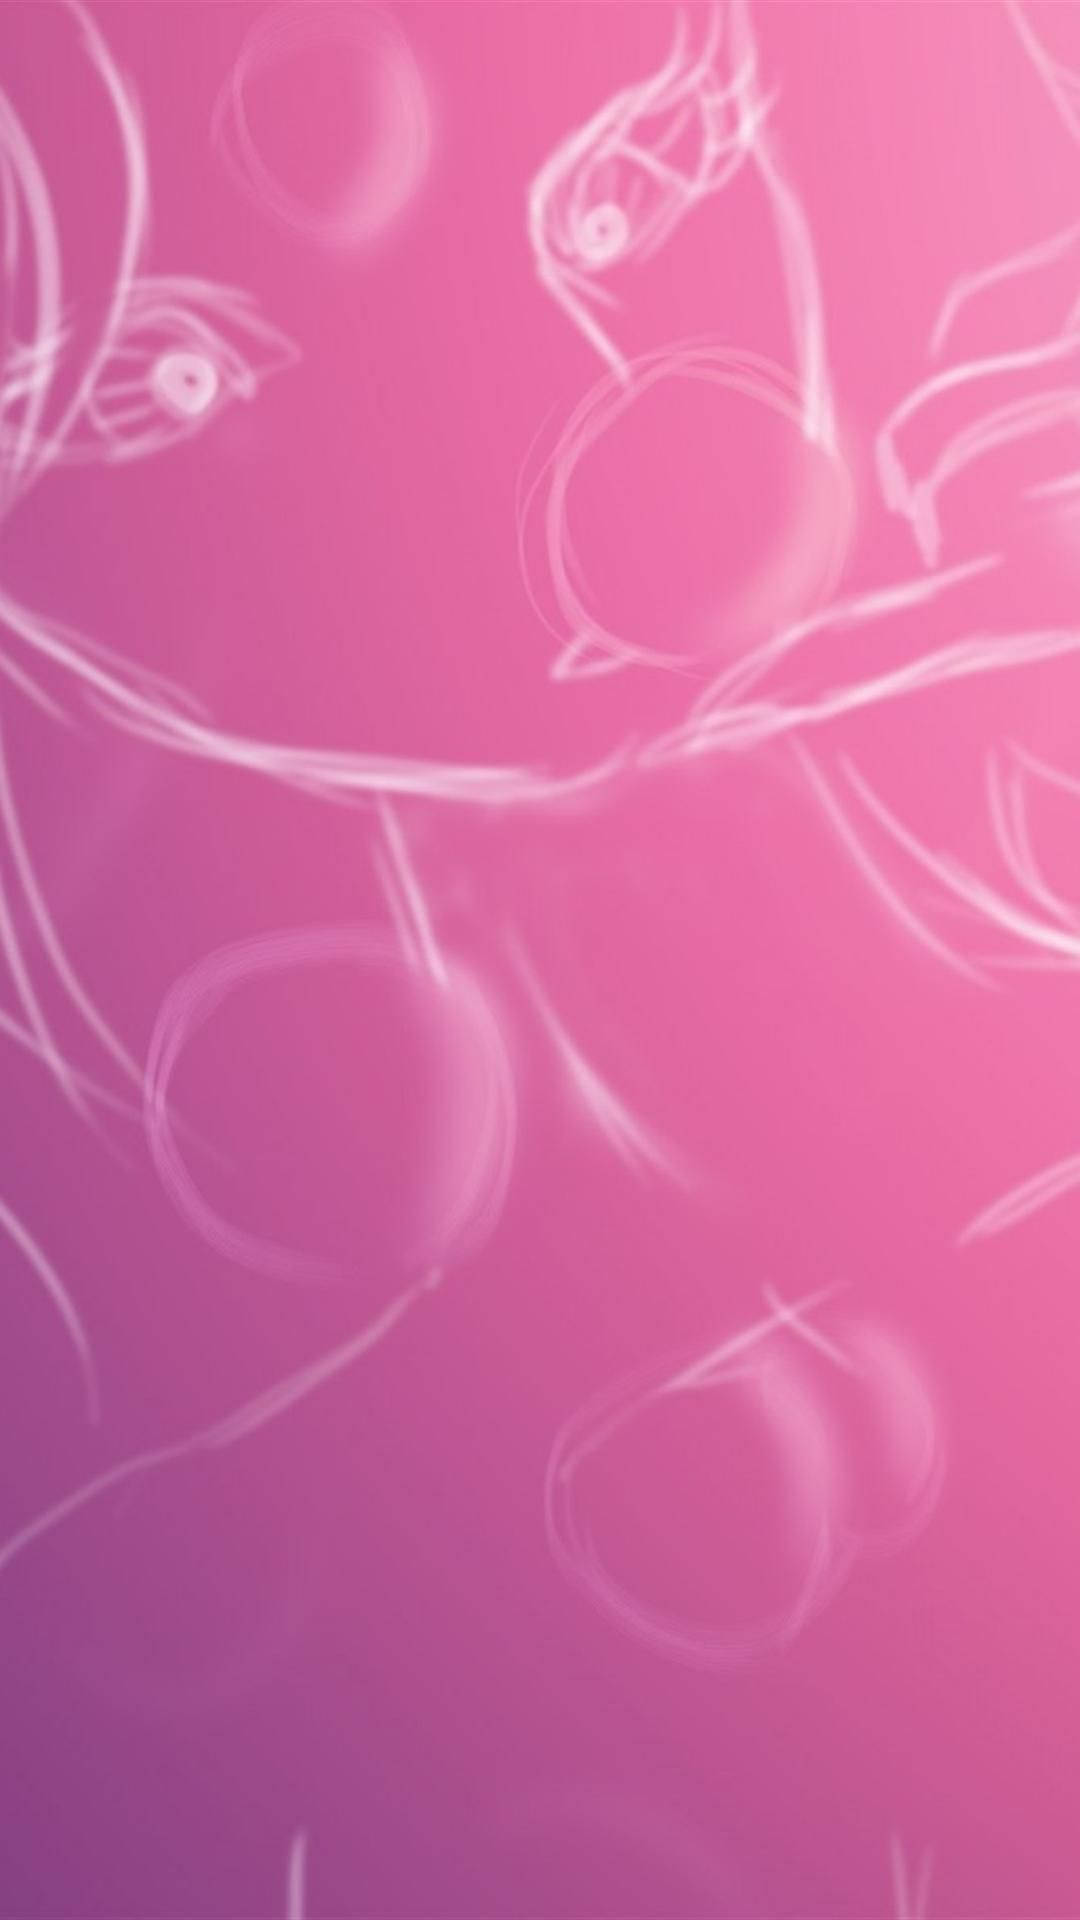 Stand out from the crowd with a stylish pastel pink iPhone. Wallpaper